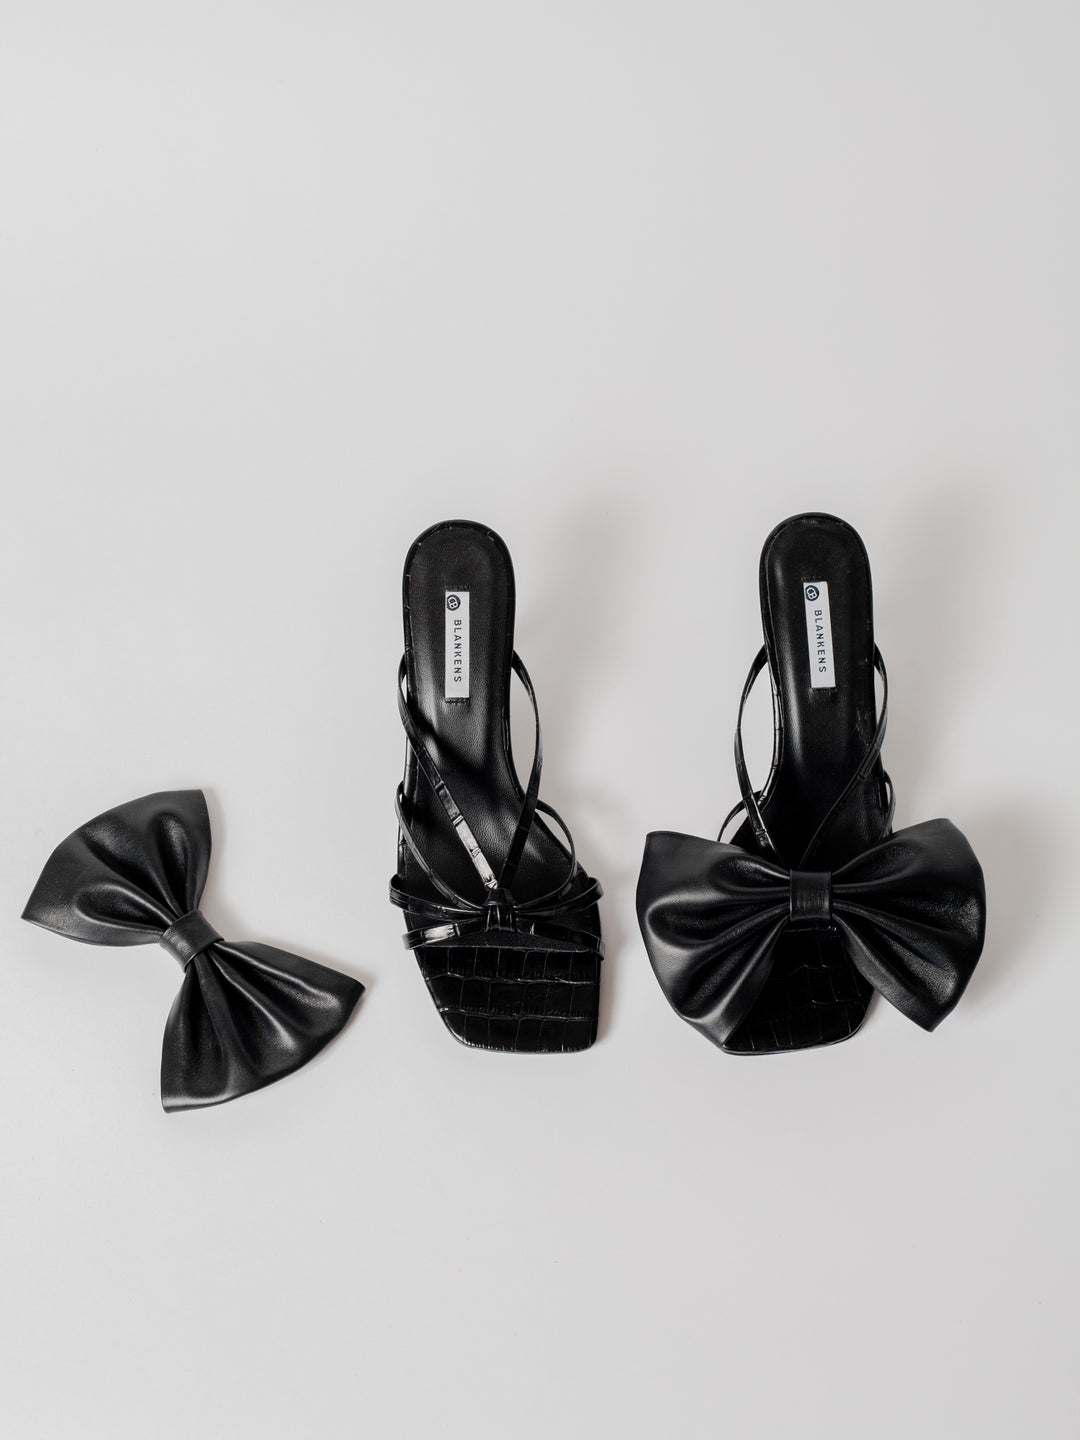 Blankens clip-on bow in black leather with sandals in black croc